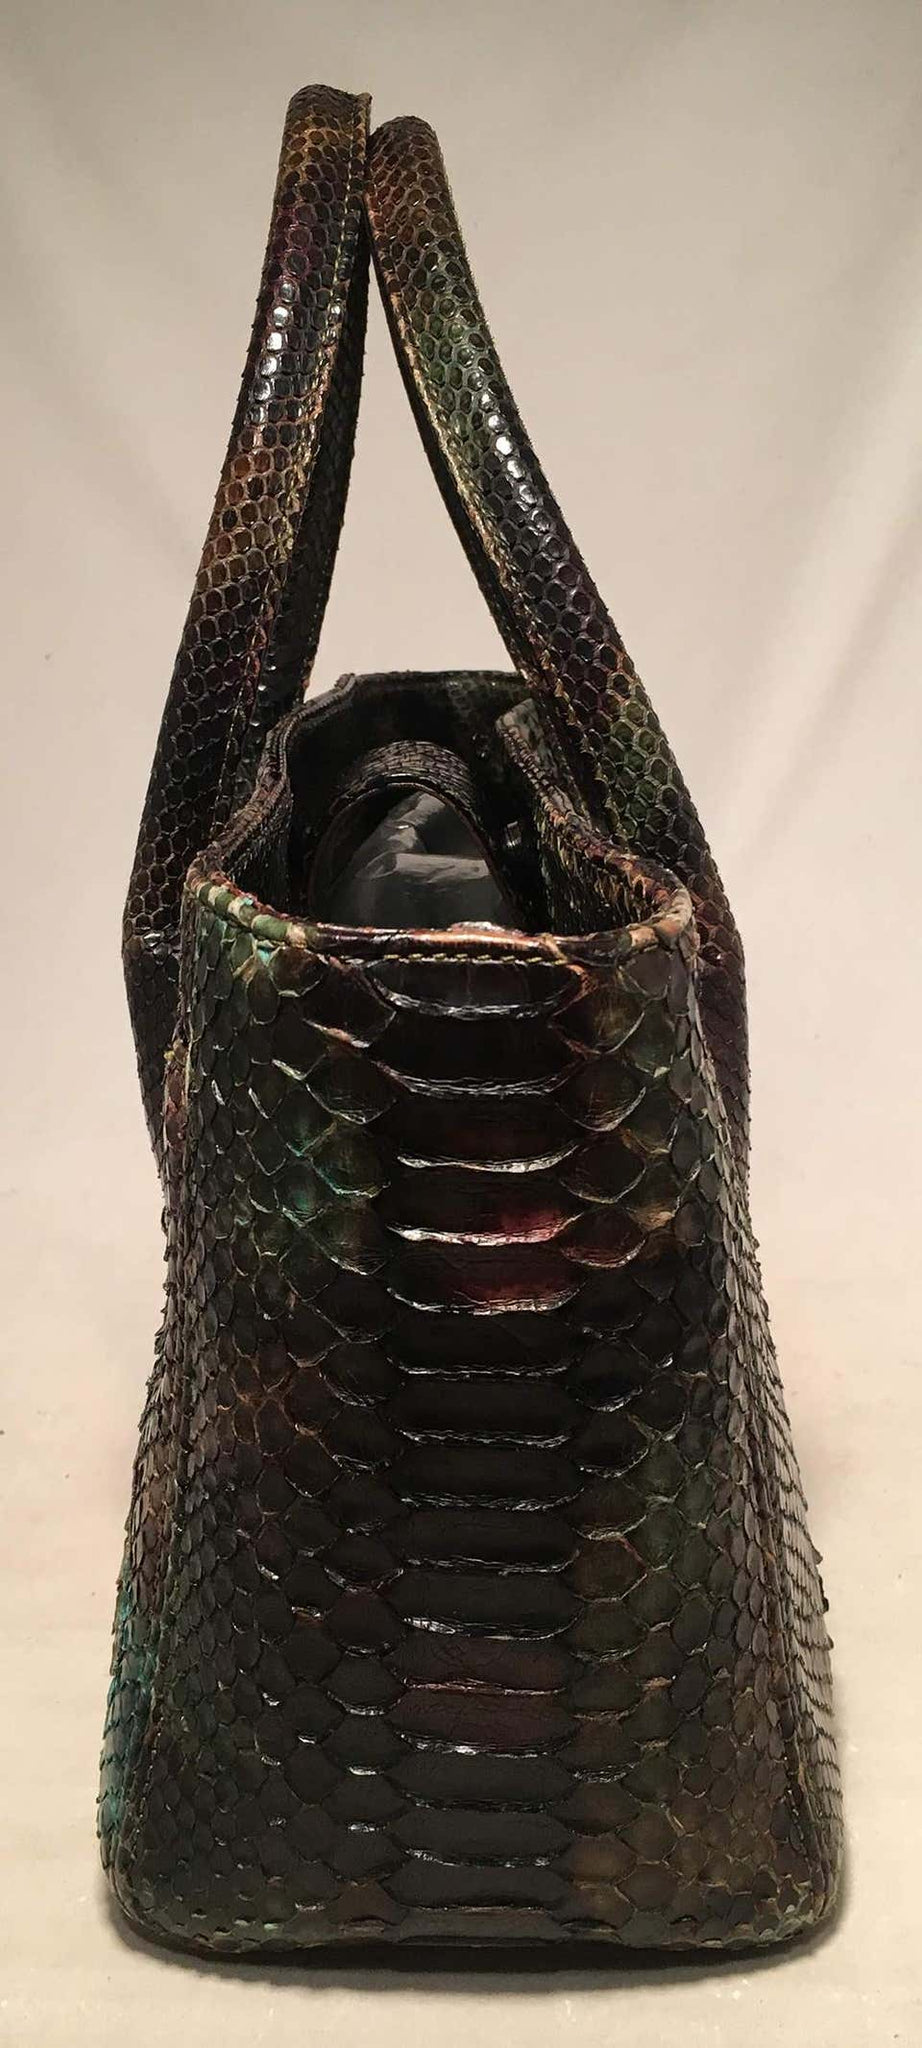 Chanel Green and Brown Multicolor Python Snakeskin Cerf Tote